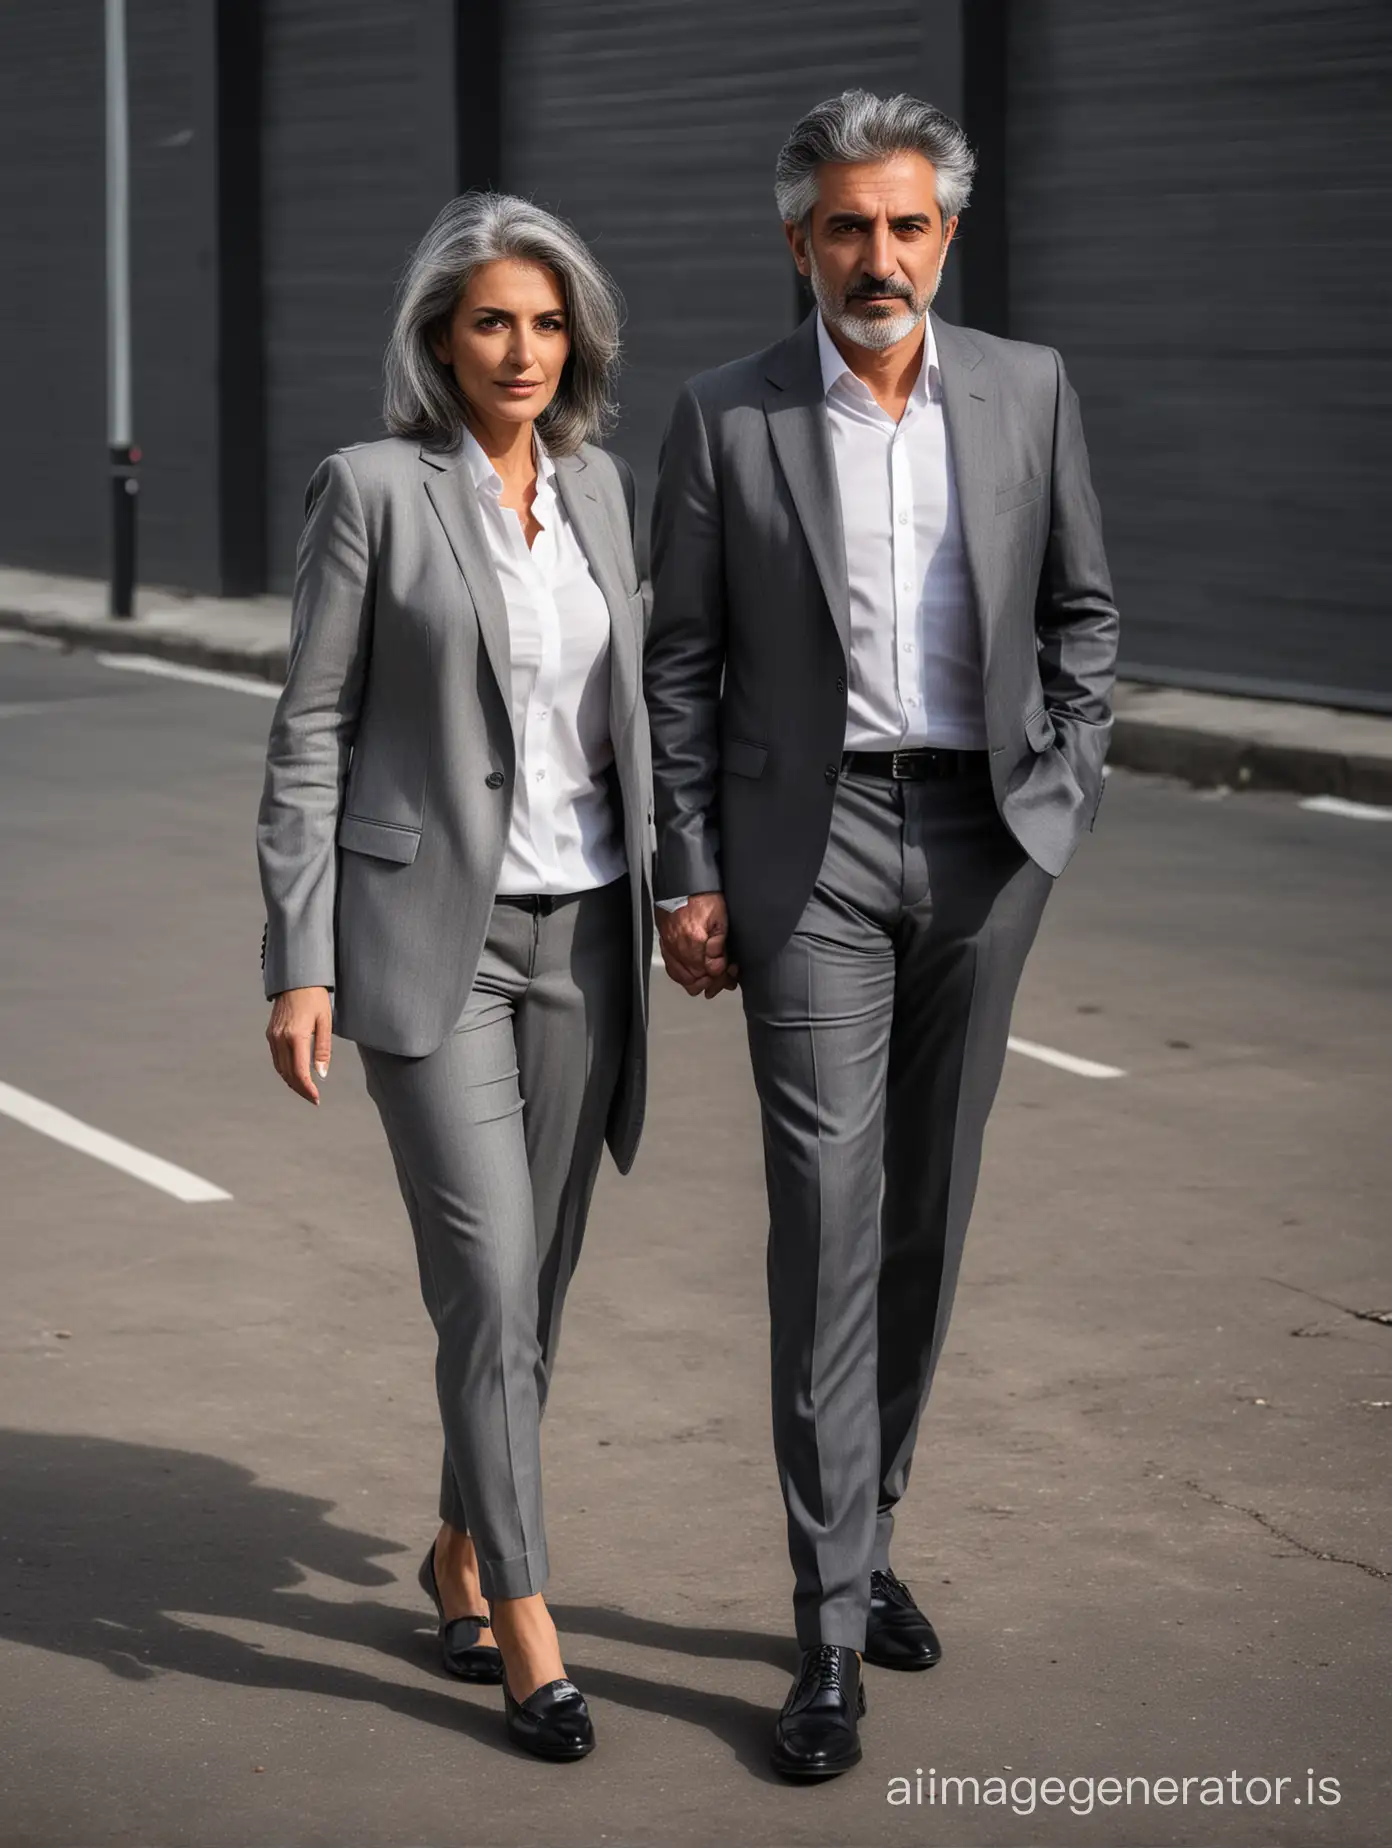 iranian short man woman 50  years old, casual style, grey suits, white shirt, black shoes ,grey hair, full body shot, in a parking, dramatic lighting